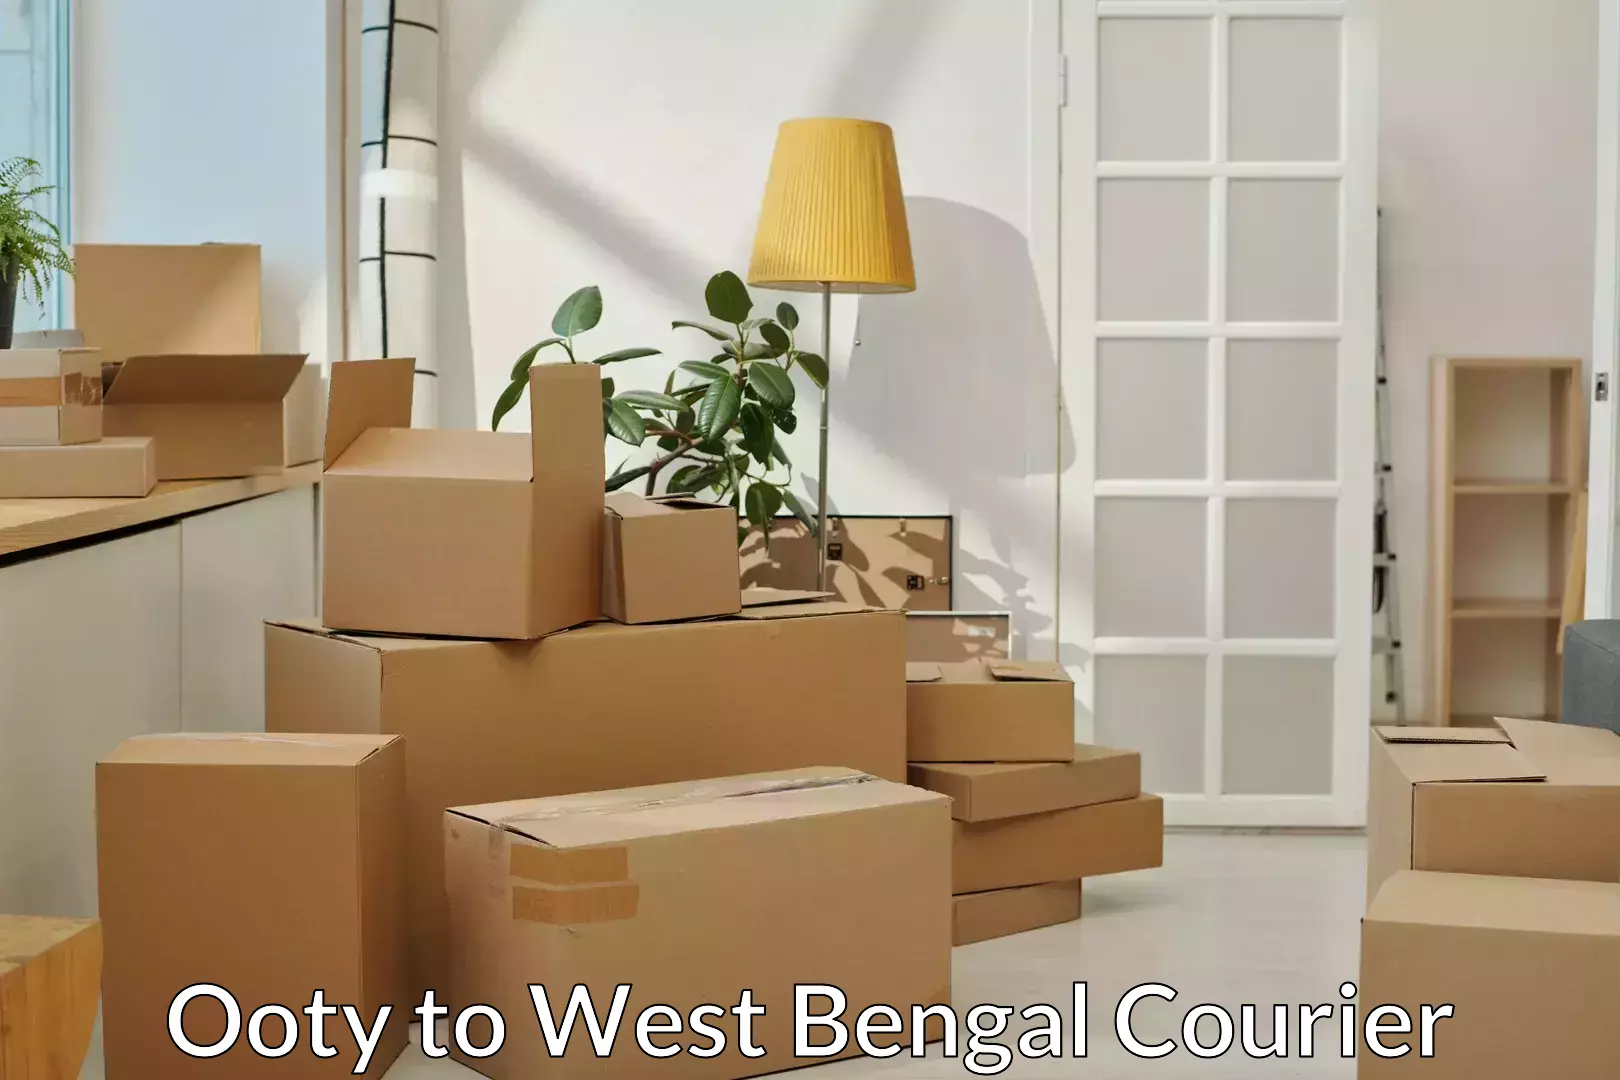 Furniture delivery service Ooty to Panihati